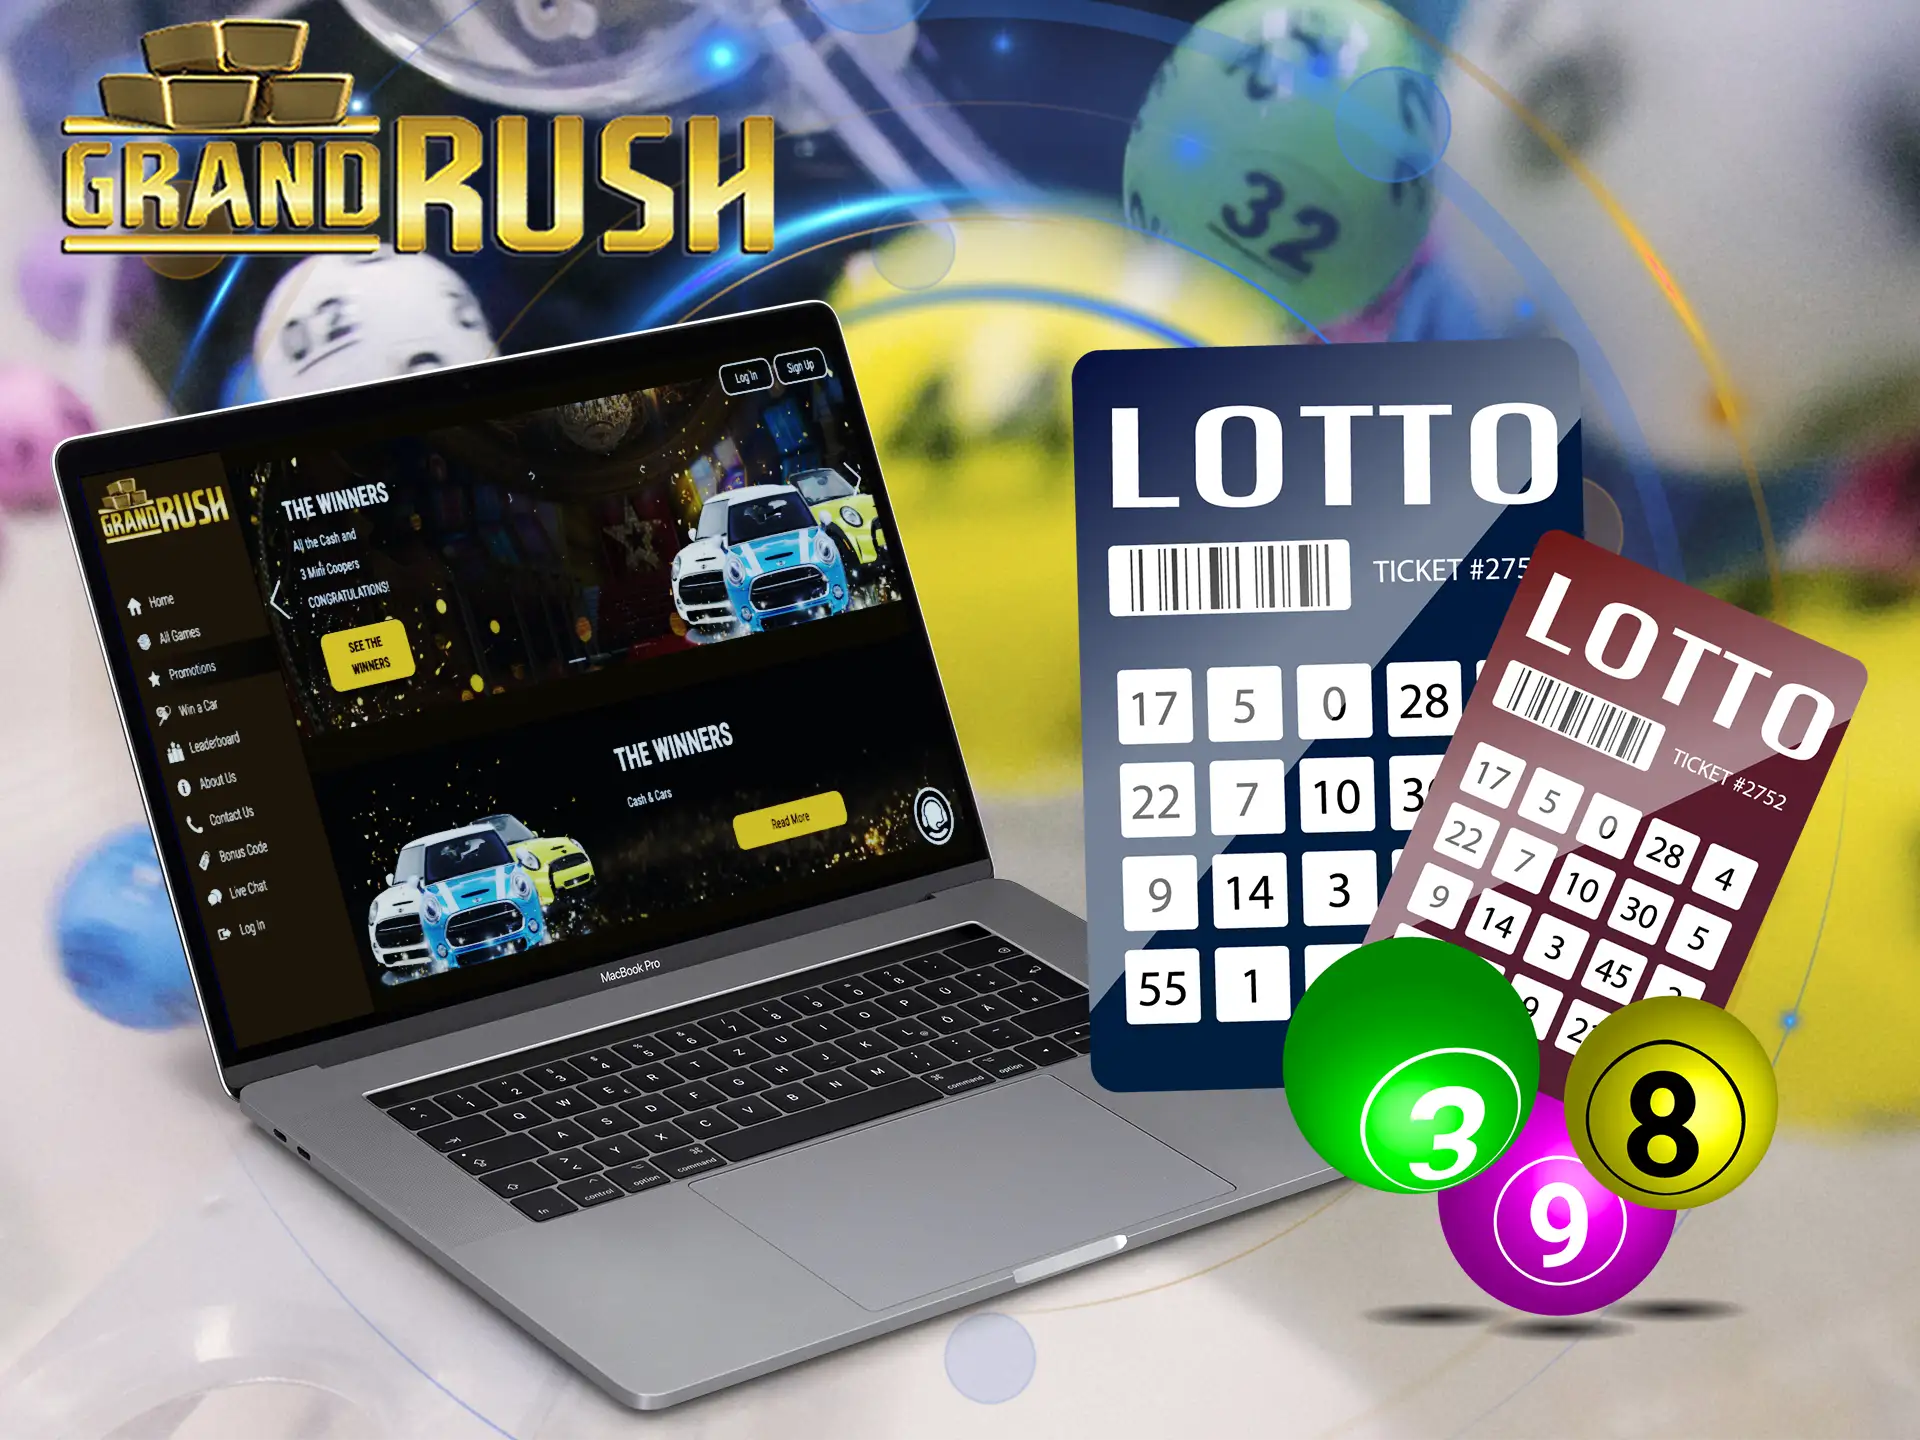 Take part in the Grand Rush Lottery Bonus and get a chance to win a Jeep Wrangler.